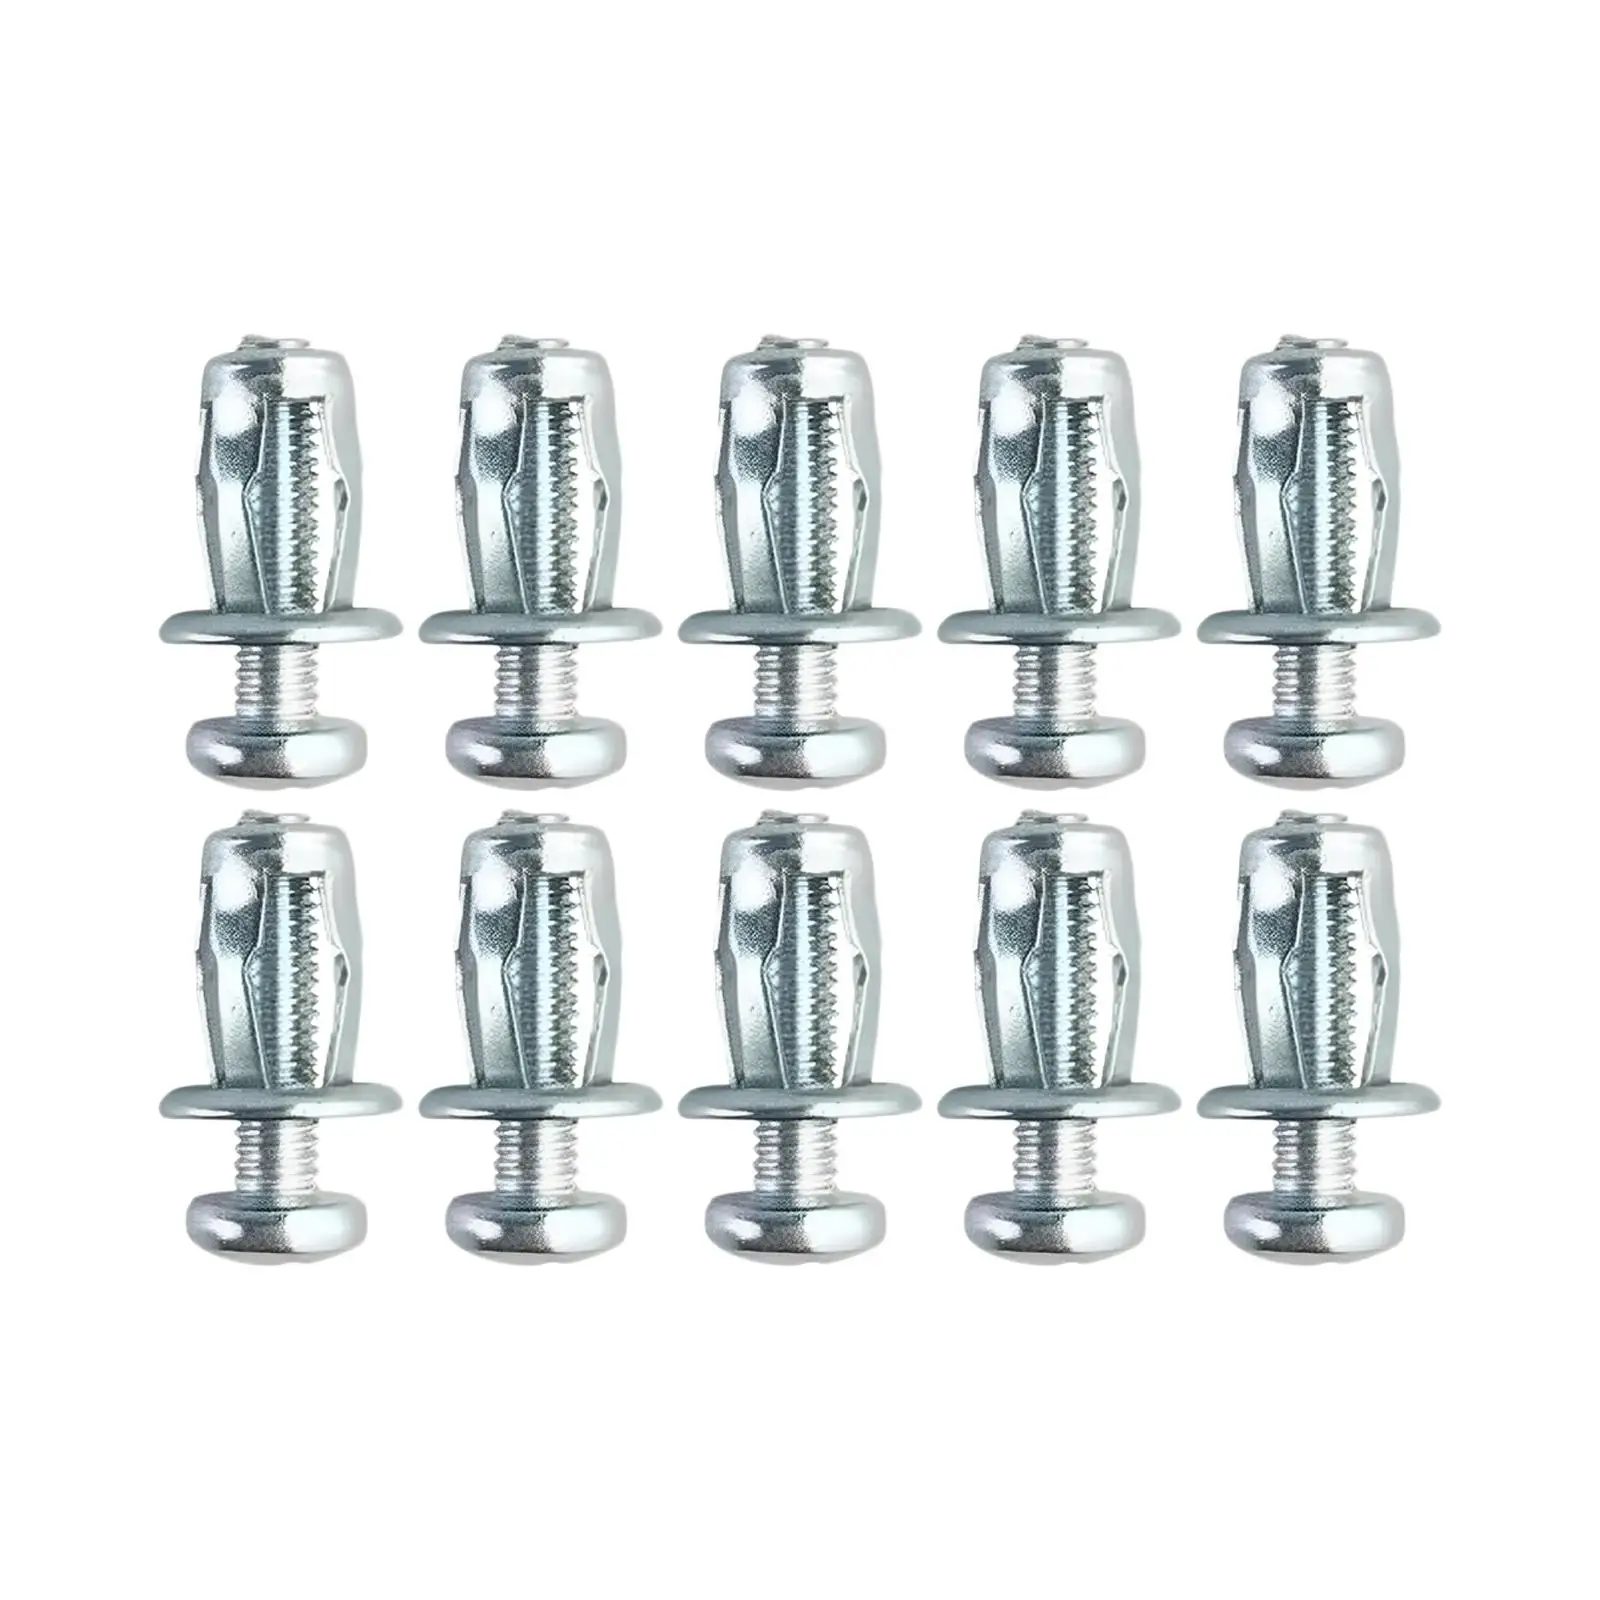 10x Petal Expansion Nut Expansion for Gypsum Board Fixing Picture Curtain Installation Cabinet Decoration Lamp Installation